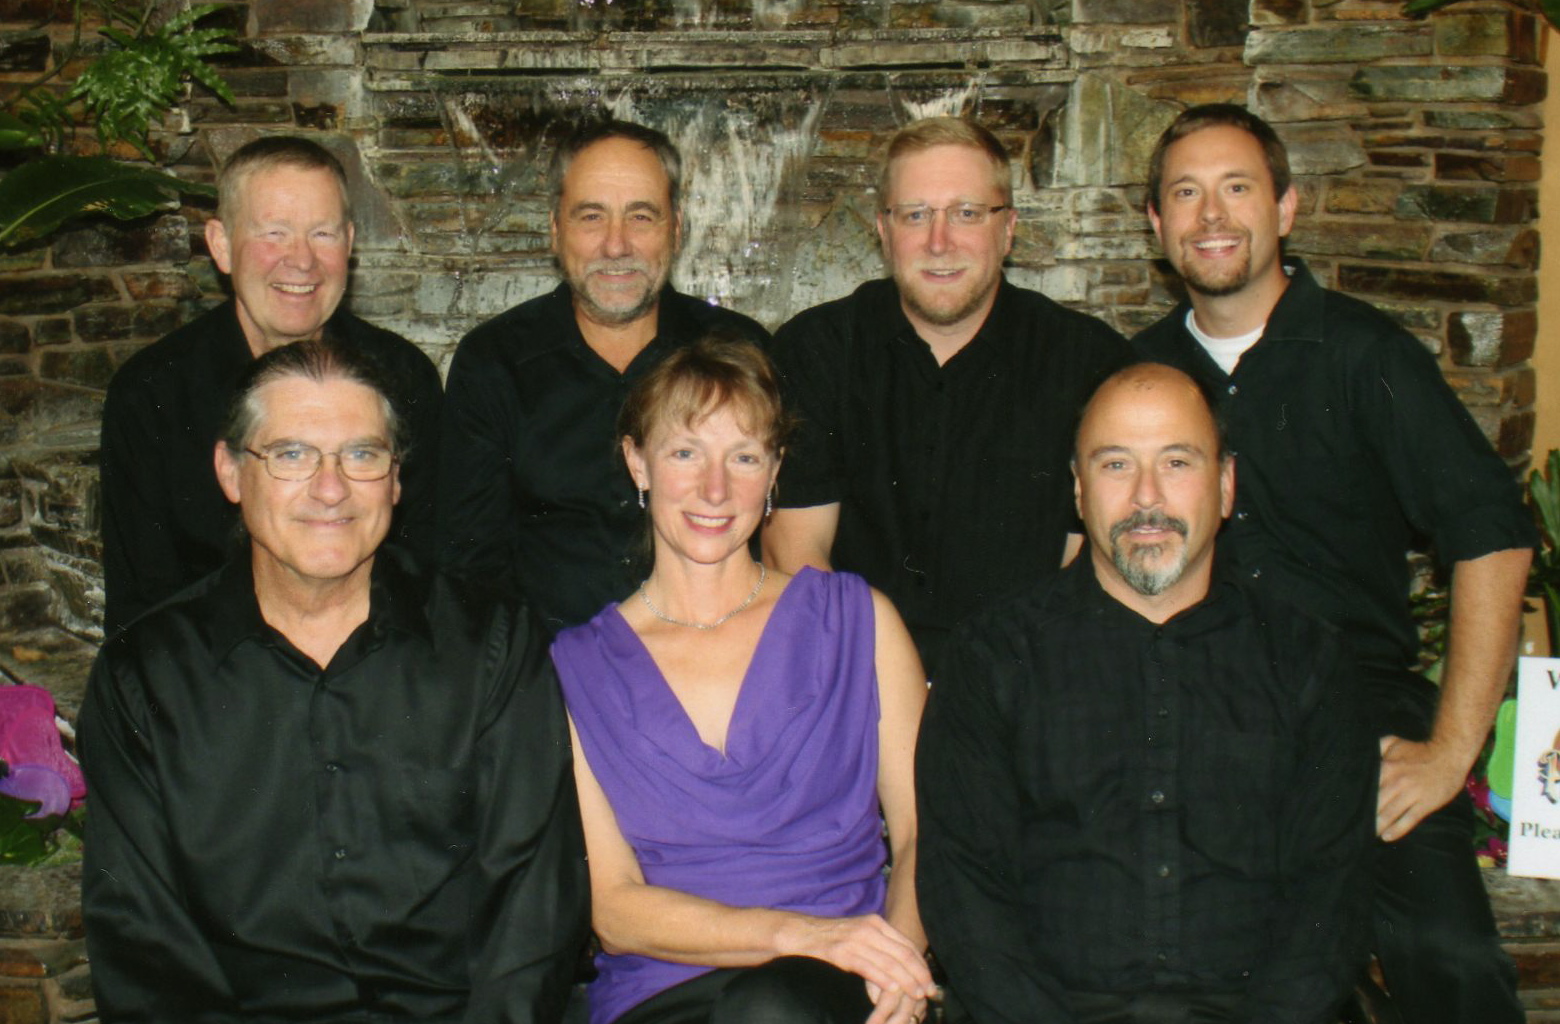 The Starlighter’s Swing Band